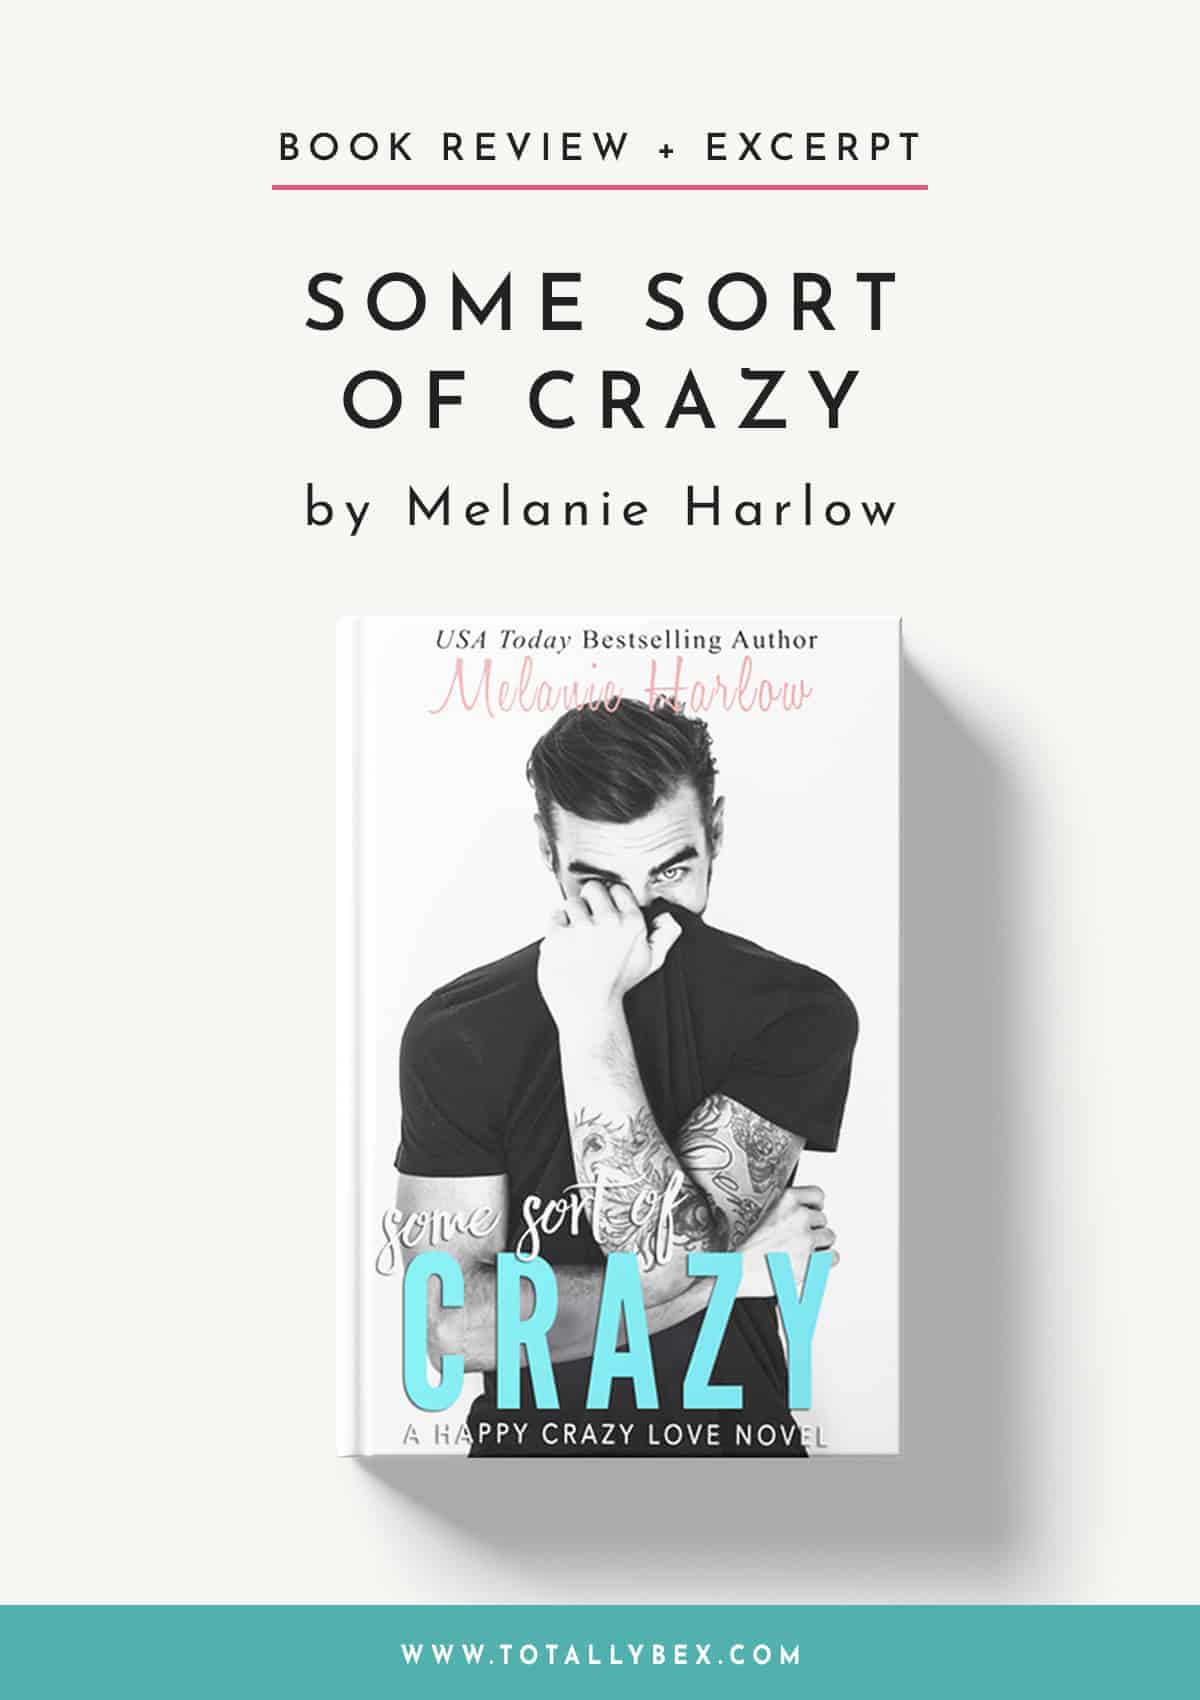 Some Sort of Crazy by Melanie Harlow – Light and Fun with Just a Hint of Angst!